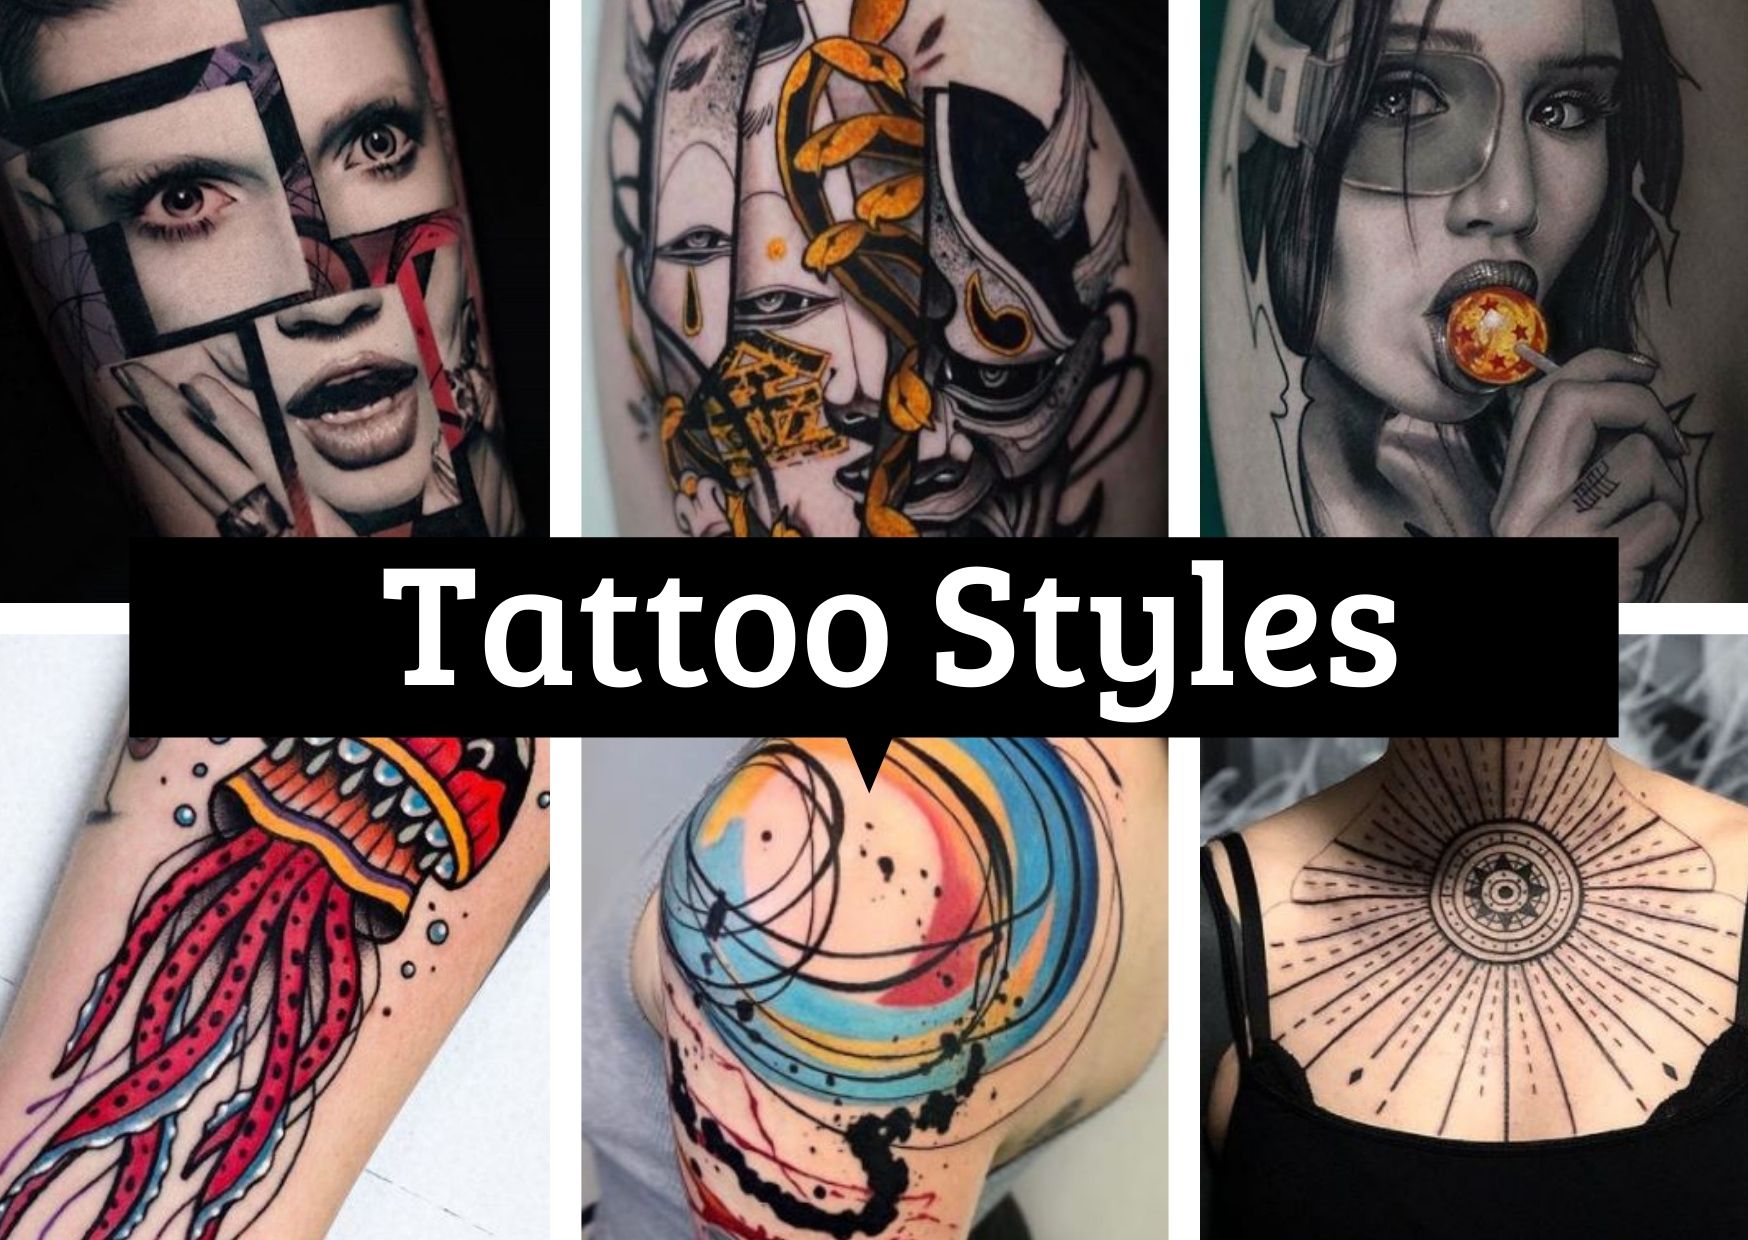 What tattoo styles hold up the best?